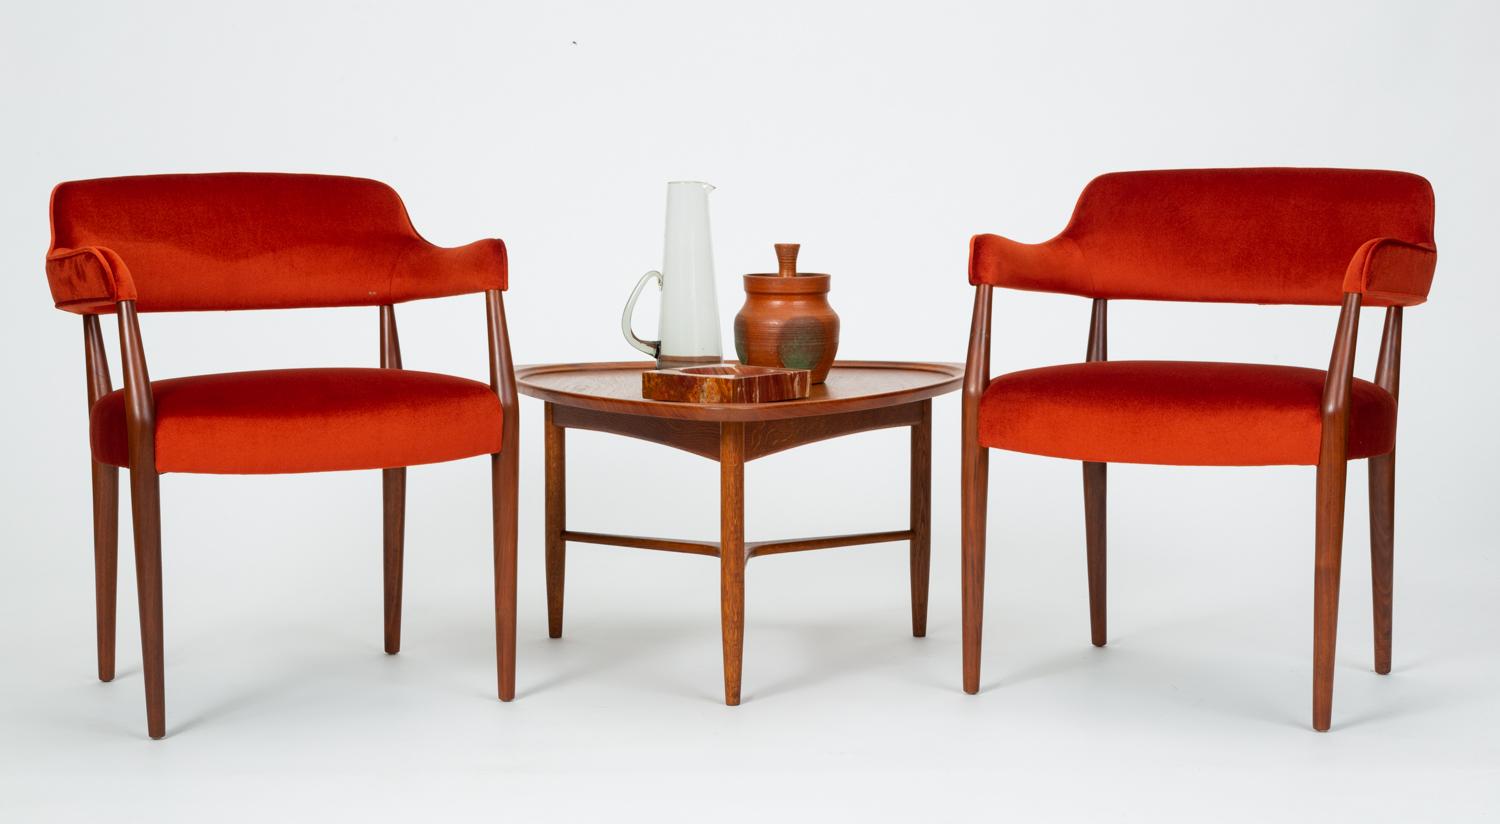 A pair of armchairs by New-York based contract furniture brand J.G. Furniture Co. with walnut frames and striking orange red mohair upholstery. Each chair has a sculpted backrest with tight upholstery and a generously padded seat cushion on matching